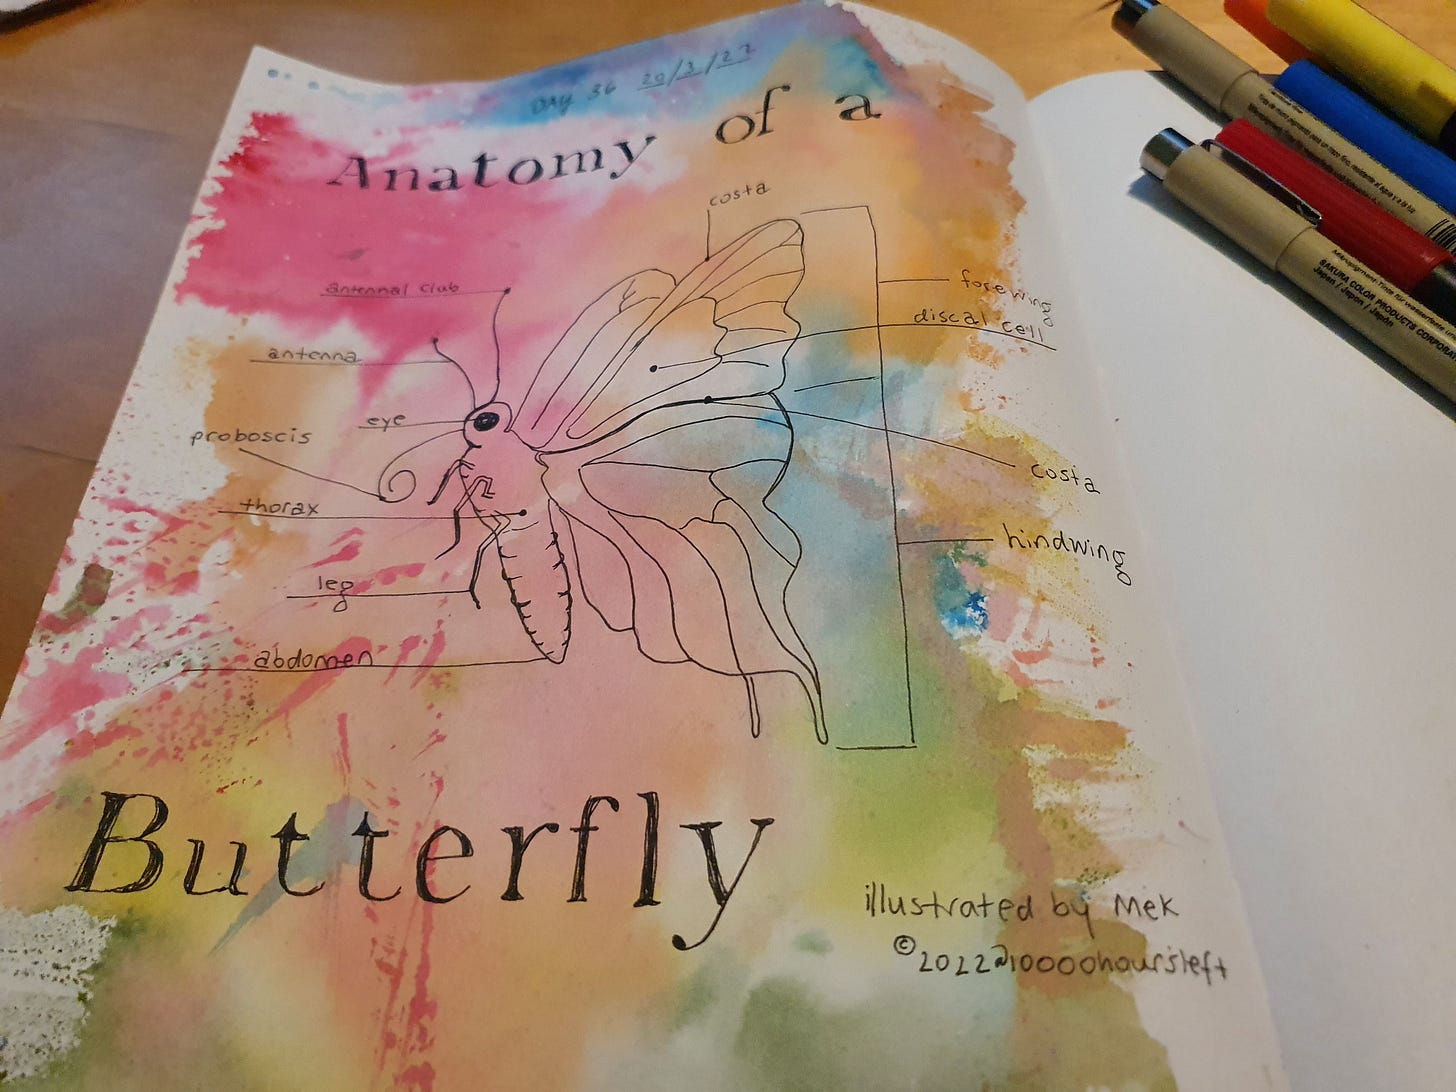 Photograph of a drawing that shows the anatomy of a butterfly. Black pen drawing on colourful watercolour background.